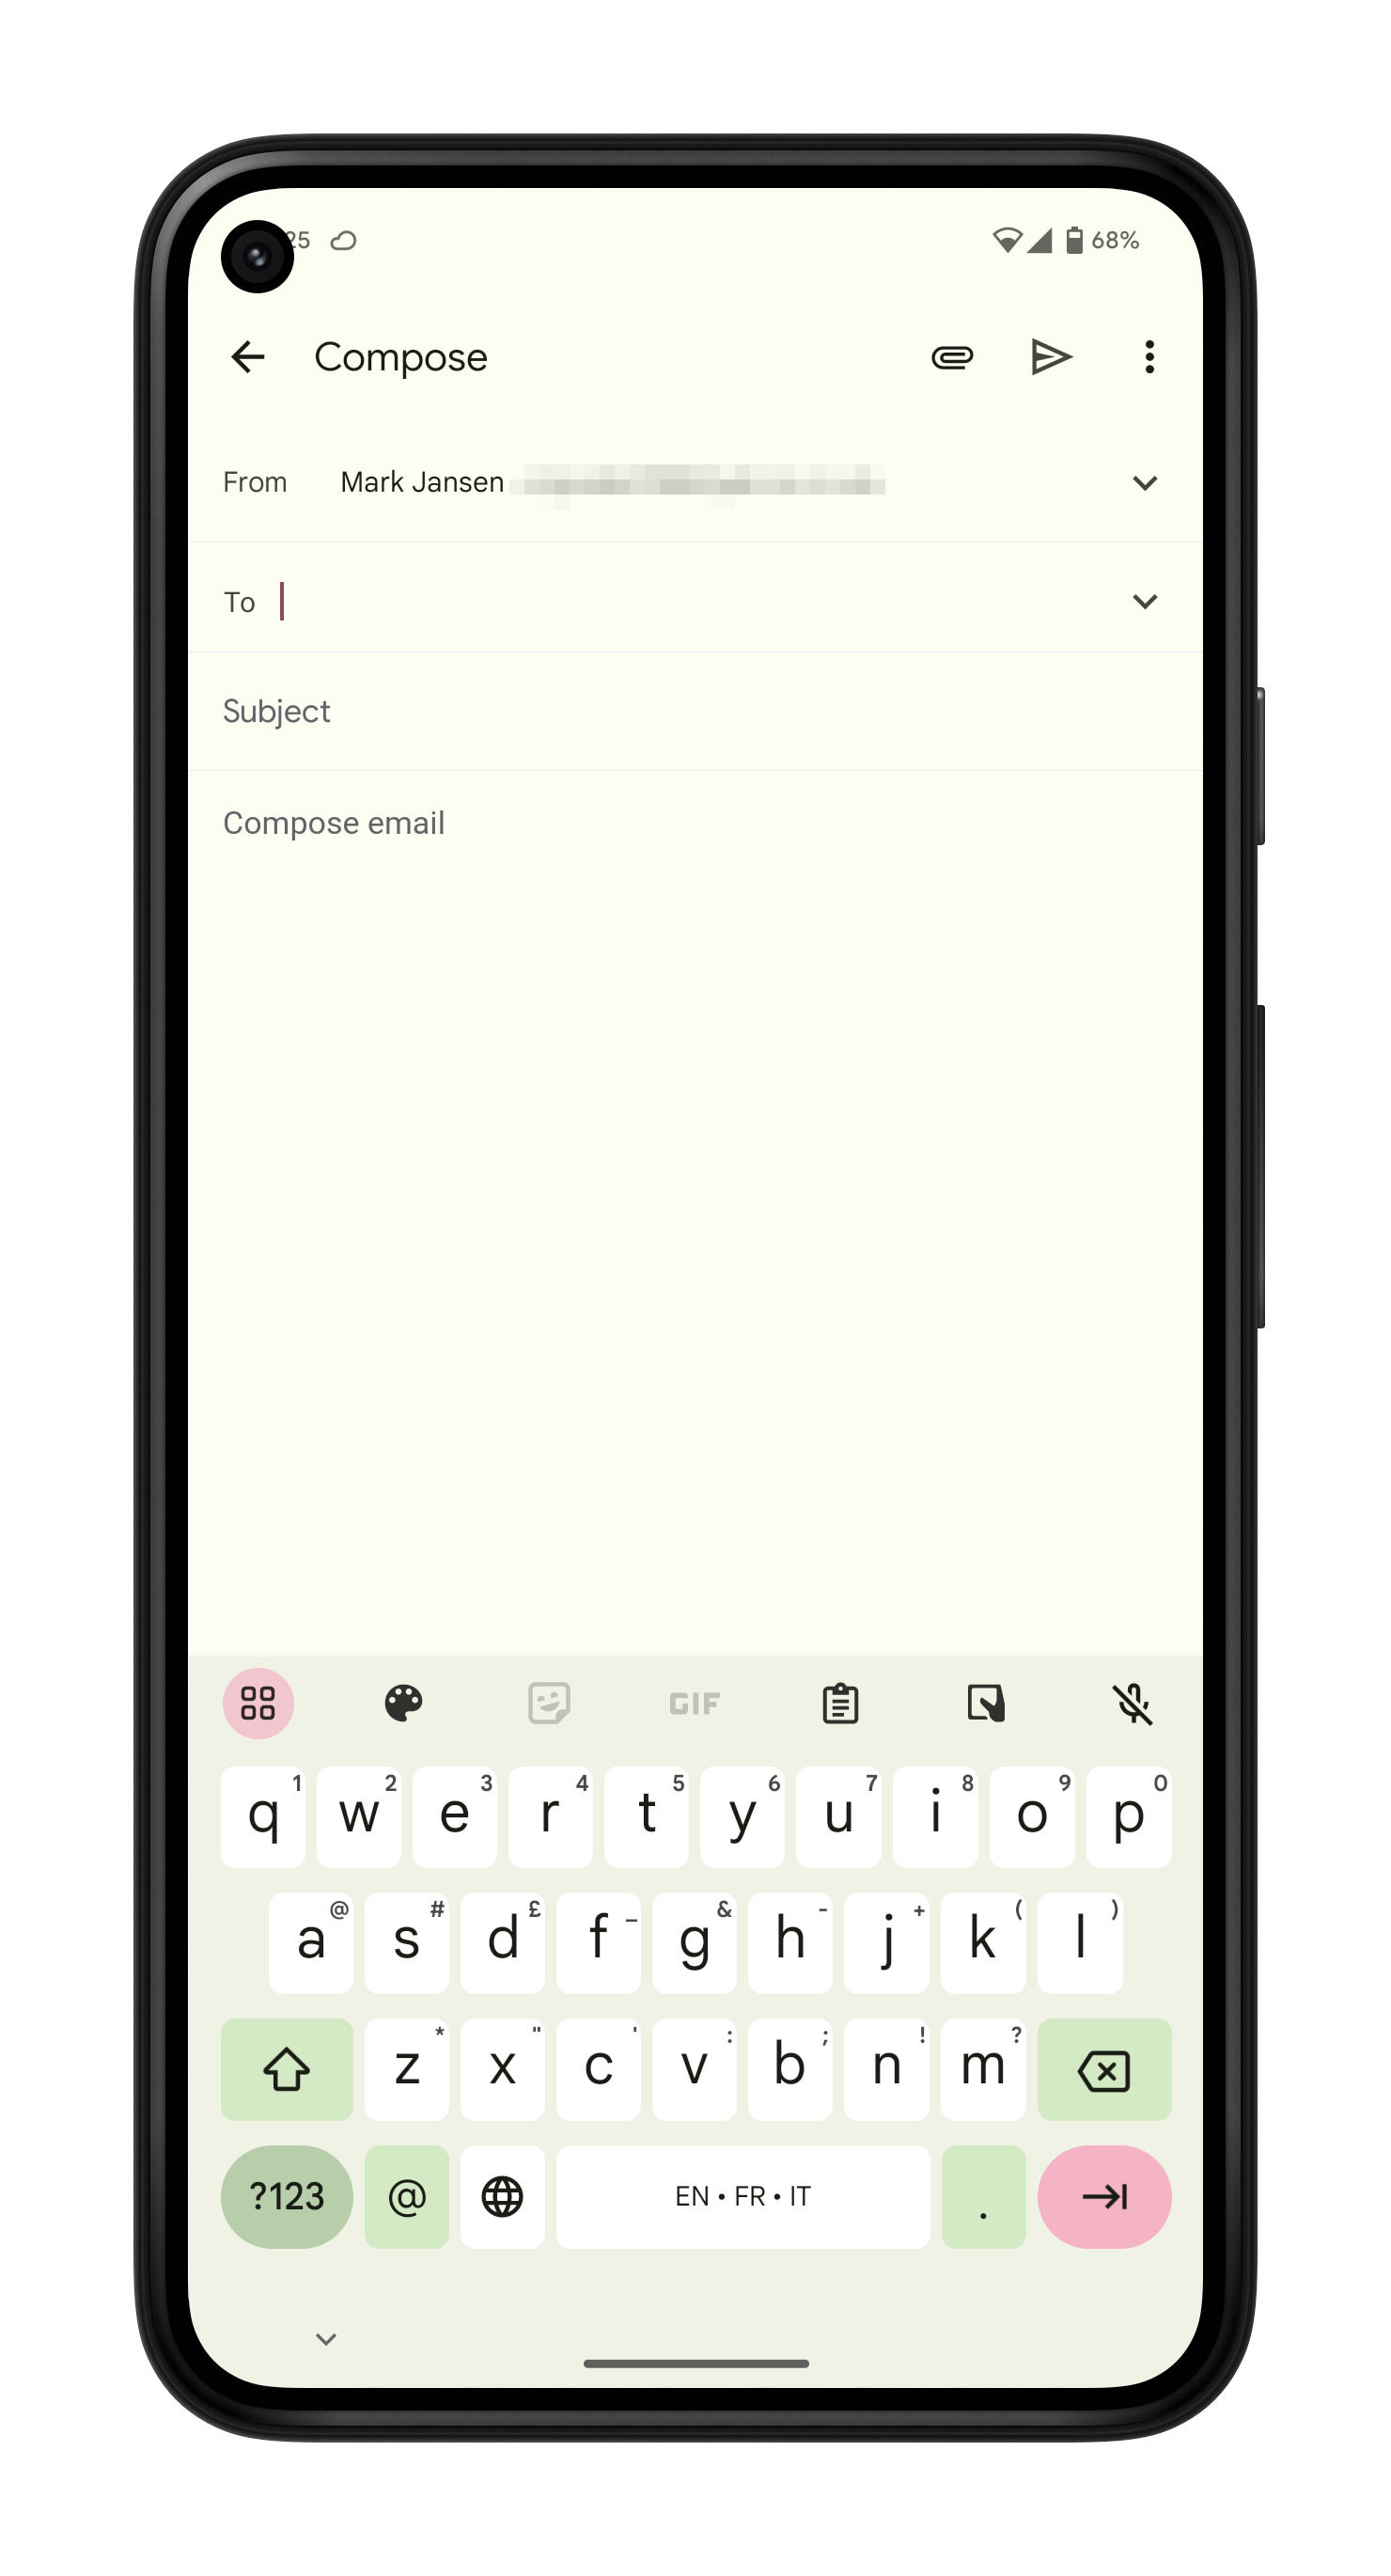 Creating a new email in Android.